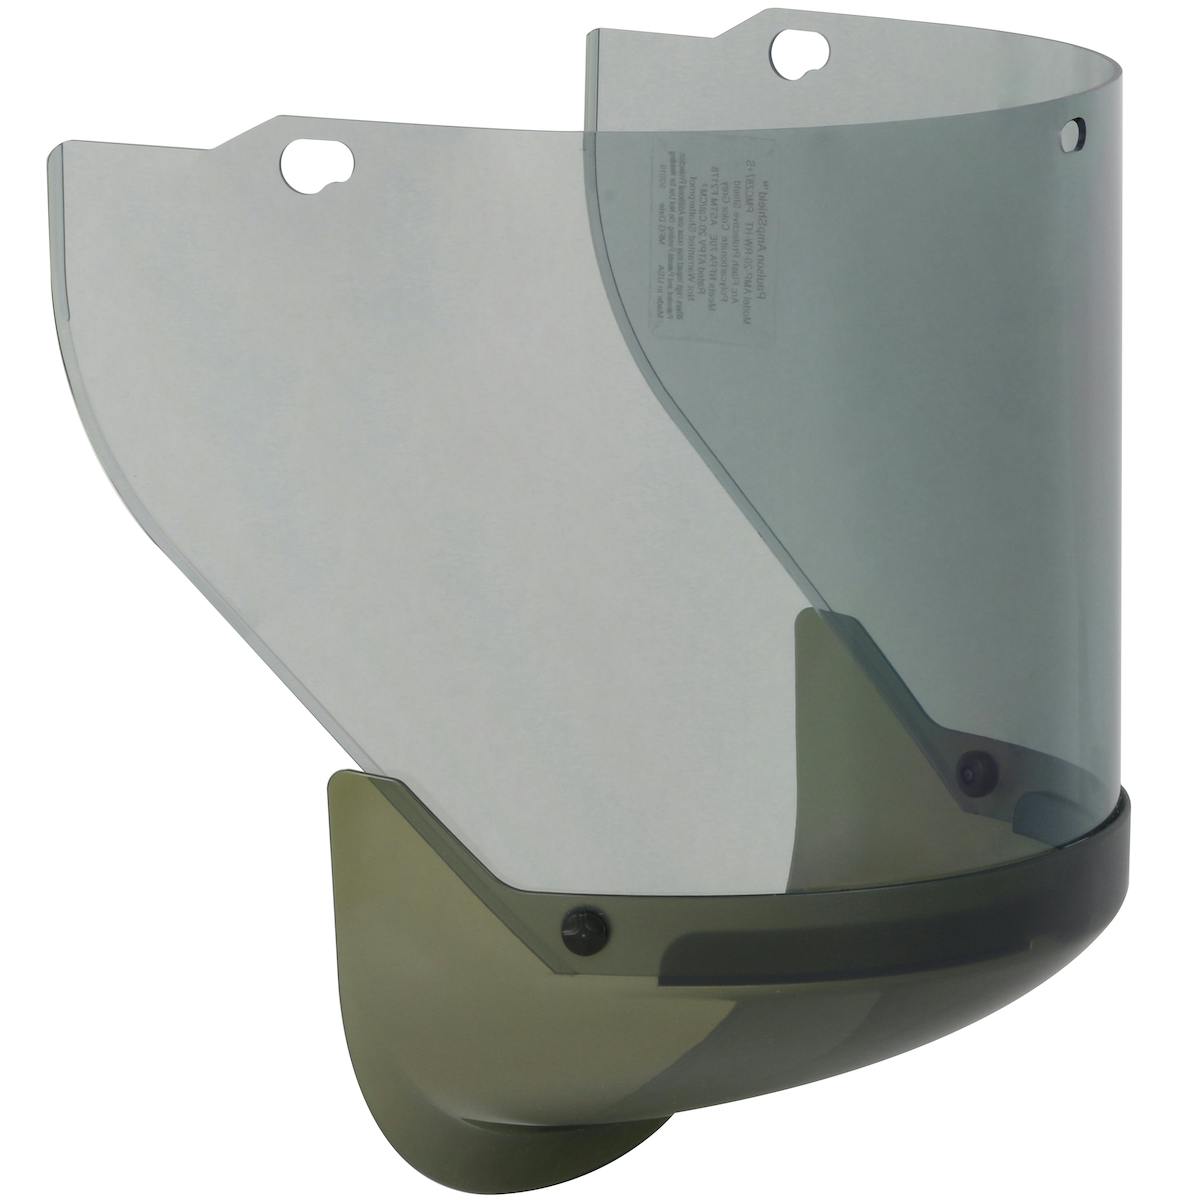 Premium AF Coated High Transparency Arc Shield Replacement - 20 Cal/cm2, Gray (9400-55504) - OS_1